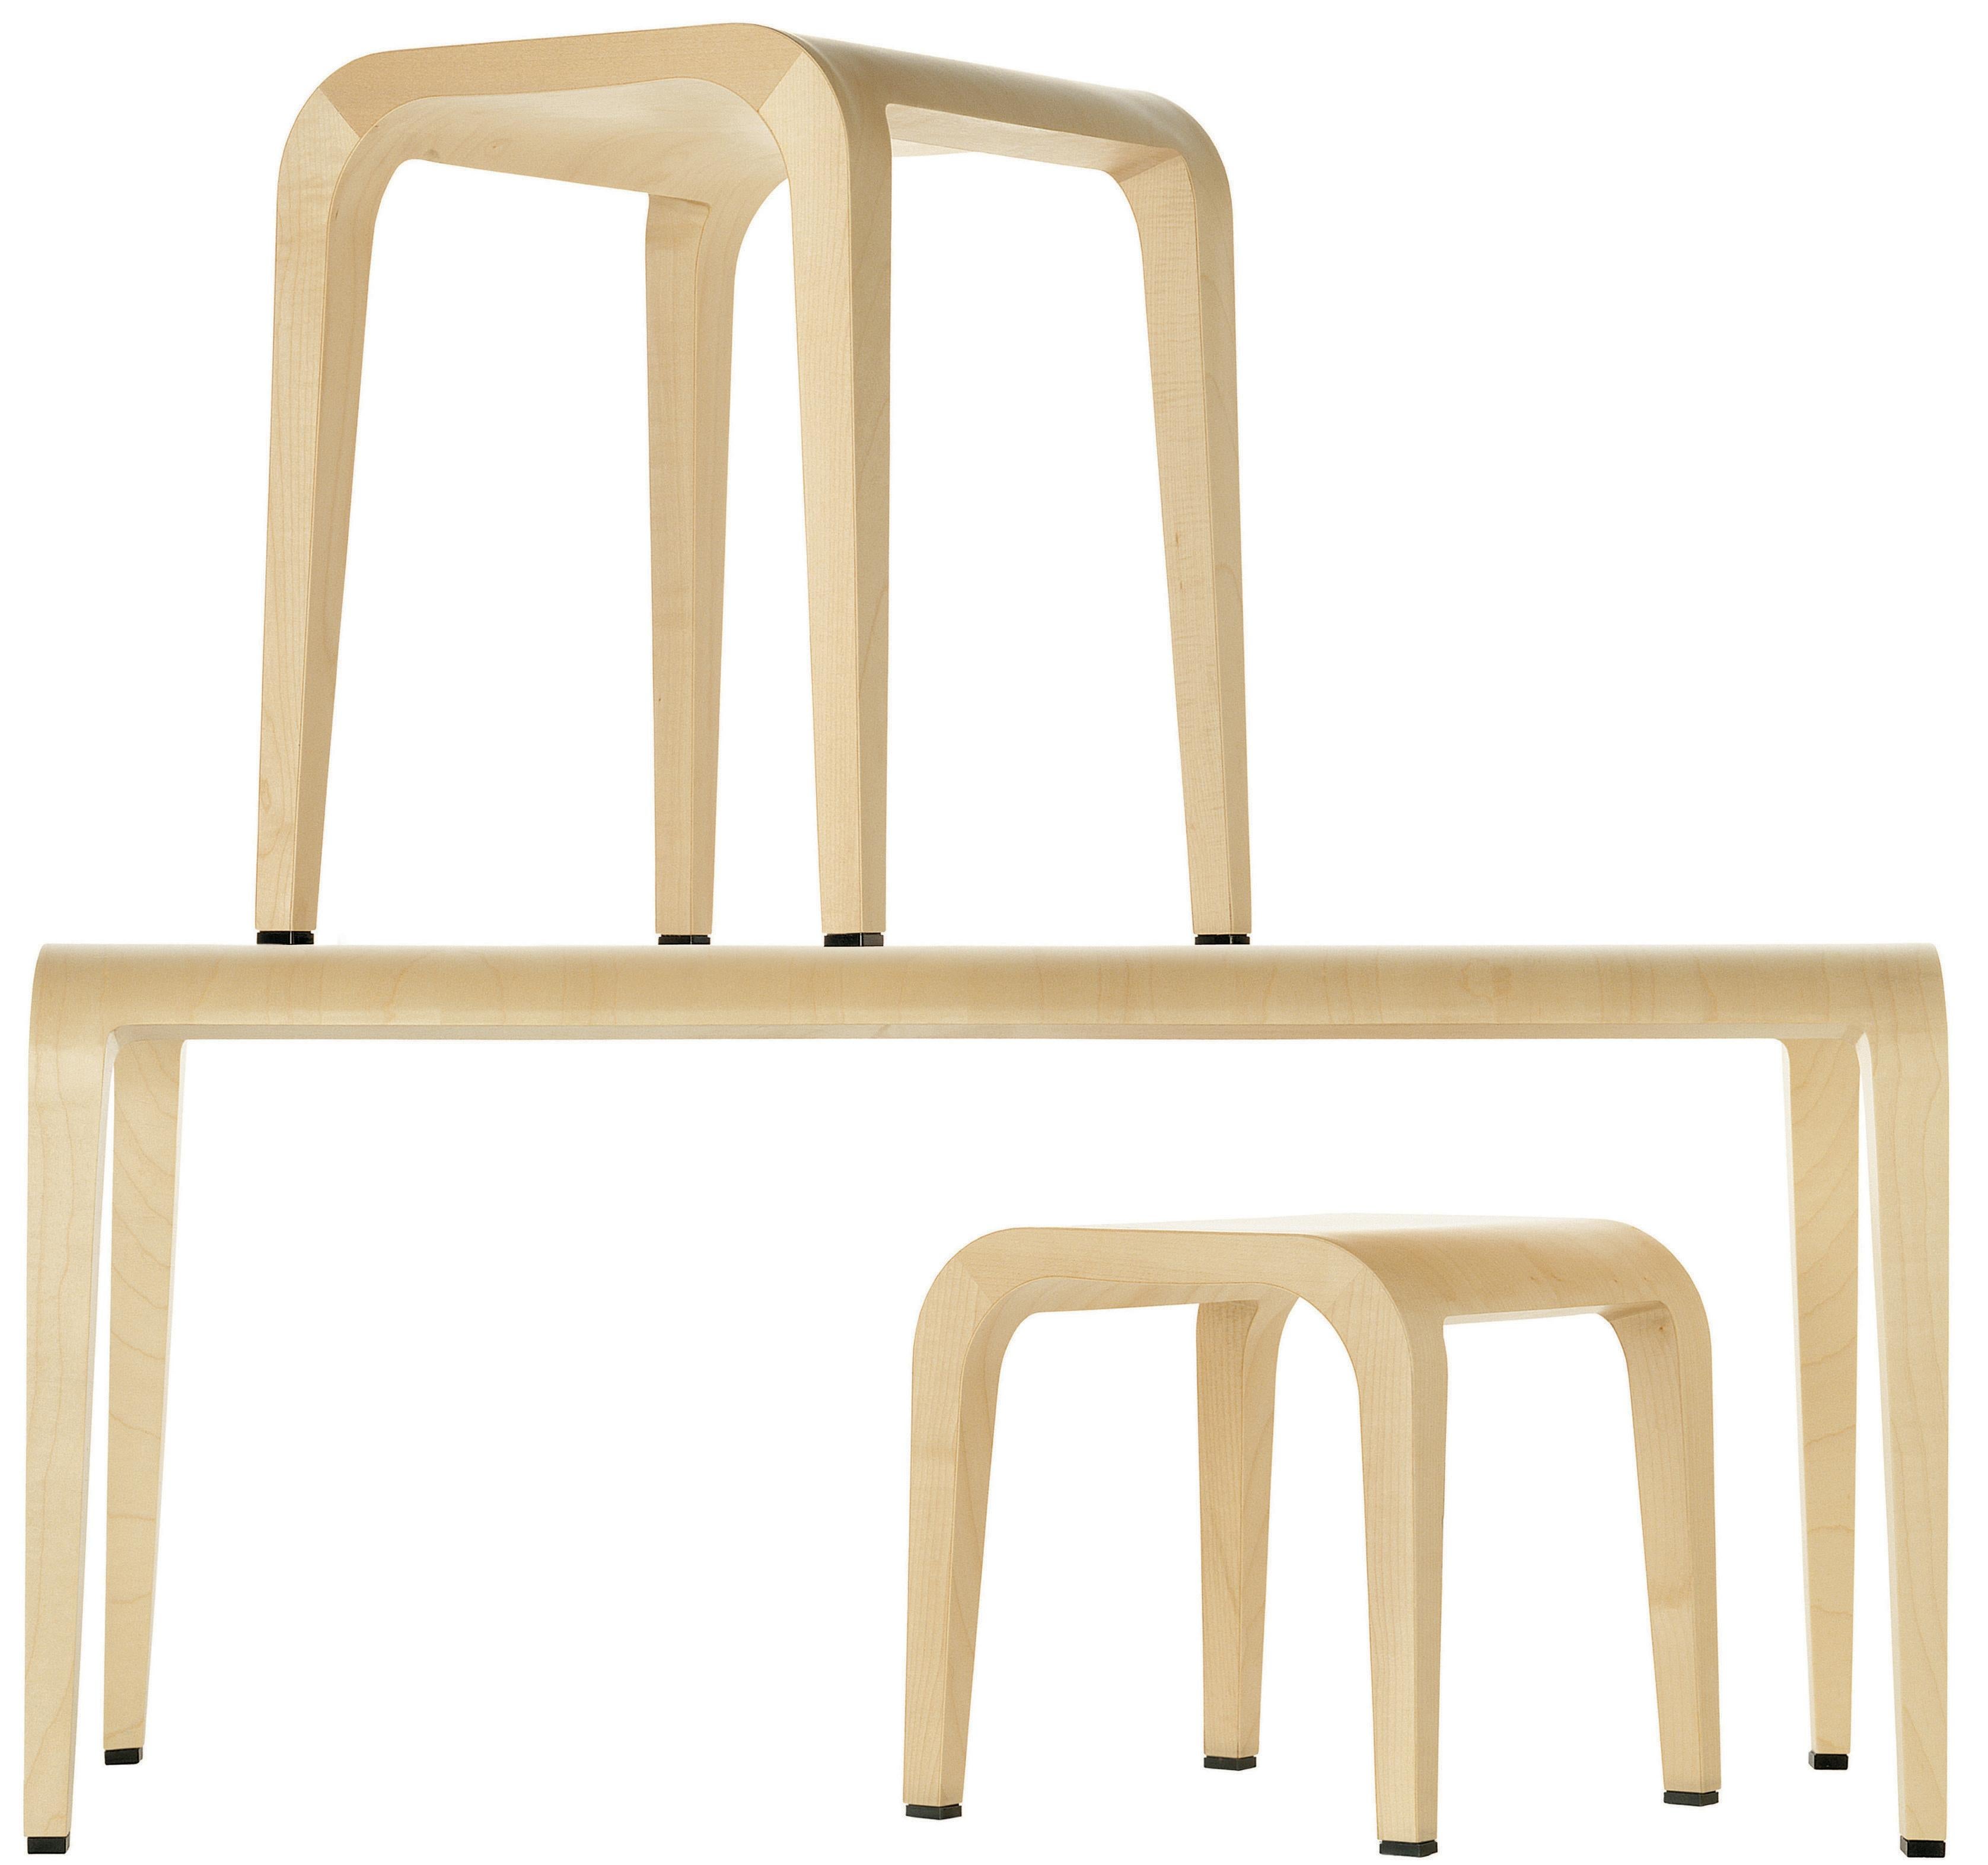 Alias 307 Laleggera Bench in Natural Maple Frame by Riccardo Blumer

Bench with structure in solid maple or ash. Maple veneer or oak veneer.Internal support in injected polyurethane foam. Finish in transparent laquage or in colored stains.

Born